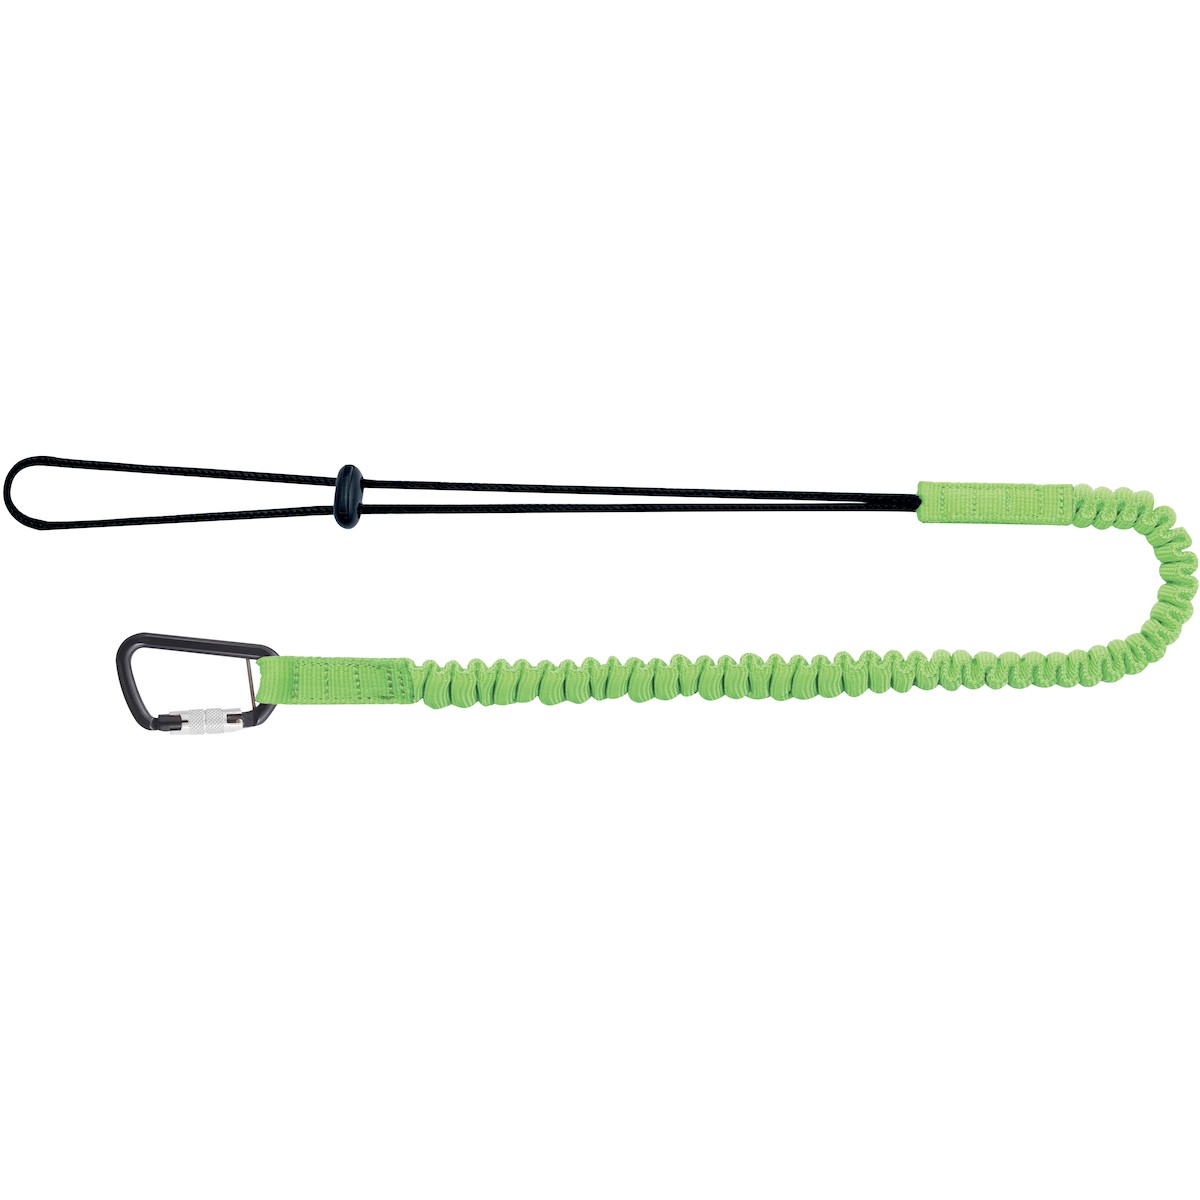 PIP® Tool Tethering Kit - includes single leg lanyard, tool connectors, and tool tape  (#533-900101)